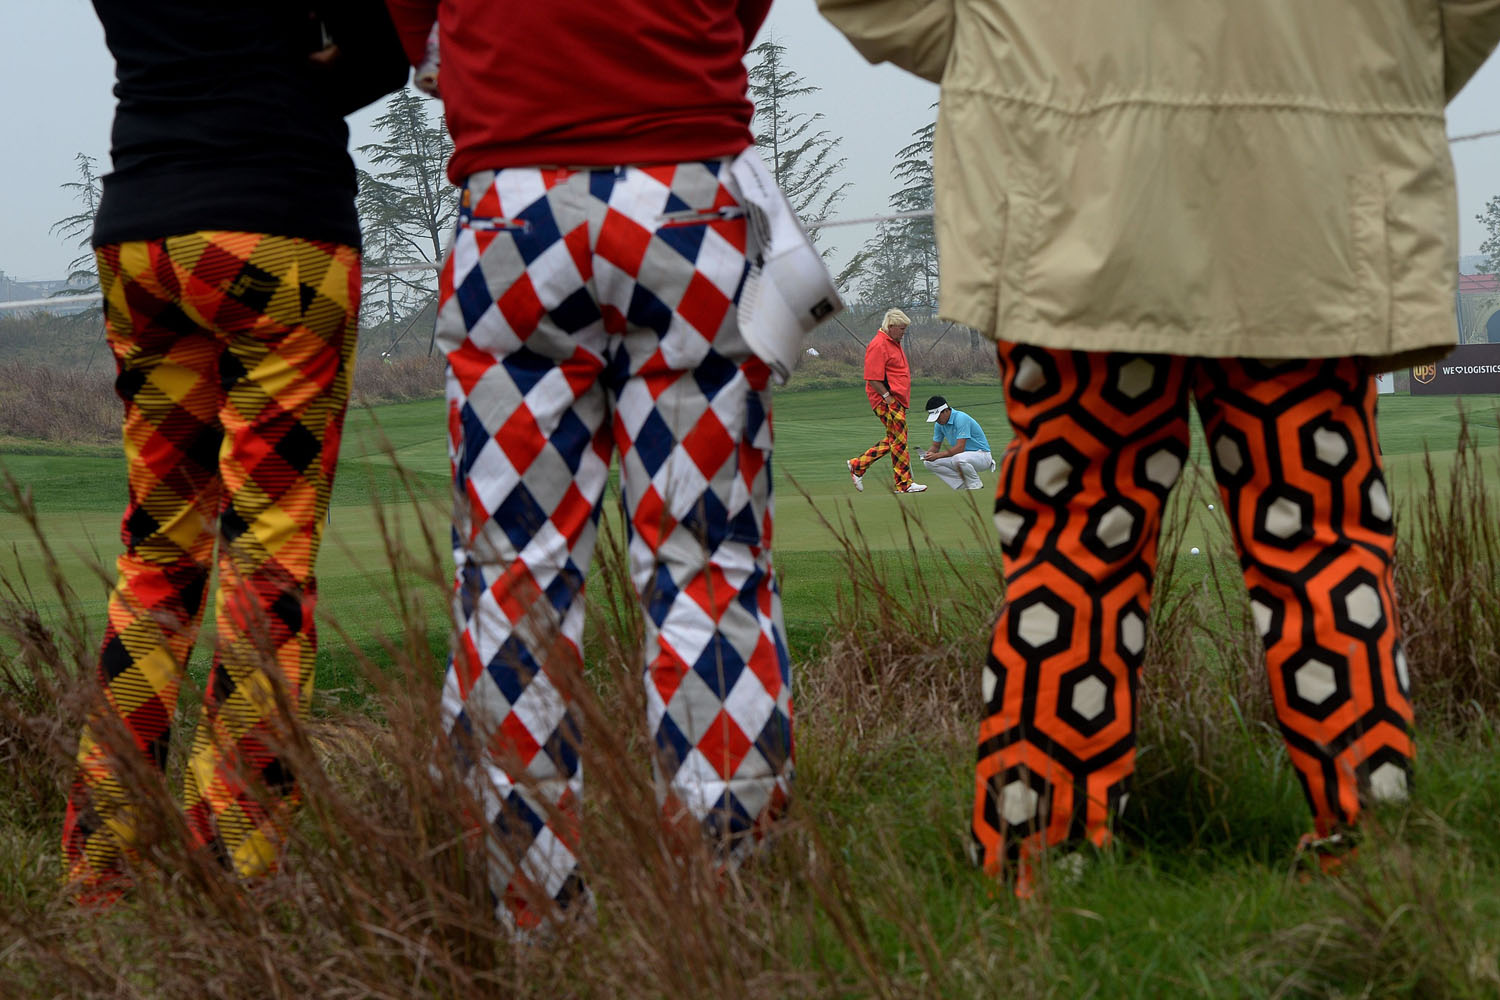 Oct. 24, 2013. John Daly of the US (back orange) is watched by his fans at the 7th hole during day one the BMW Shanghai Masters golf tournament at the Lake Malaren Golf Club in Shanghai.